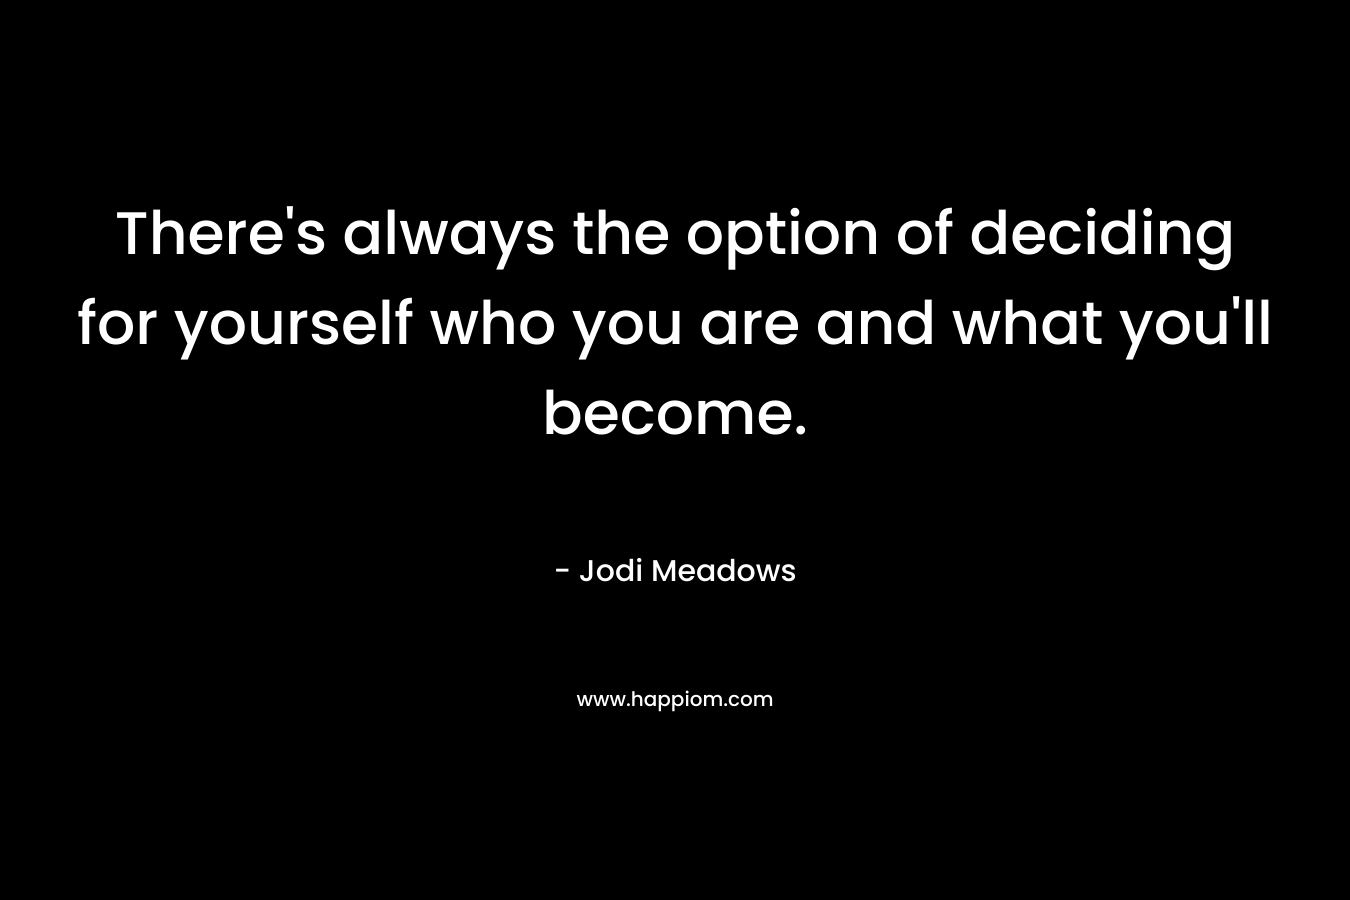 There’s always the option of deciding for yourself who you are and what you’ll become. – Jodi Meadows